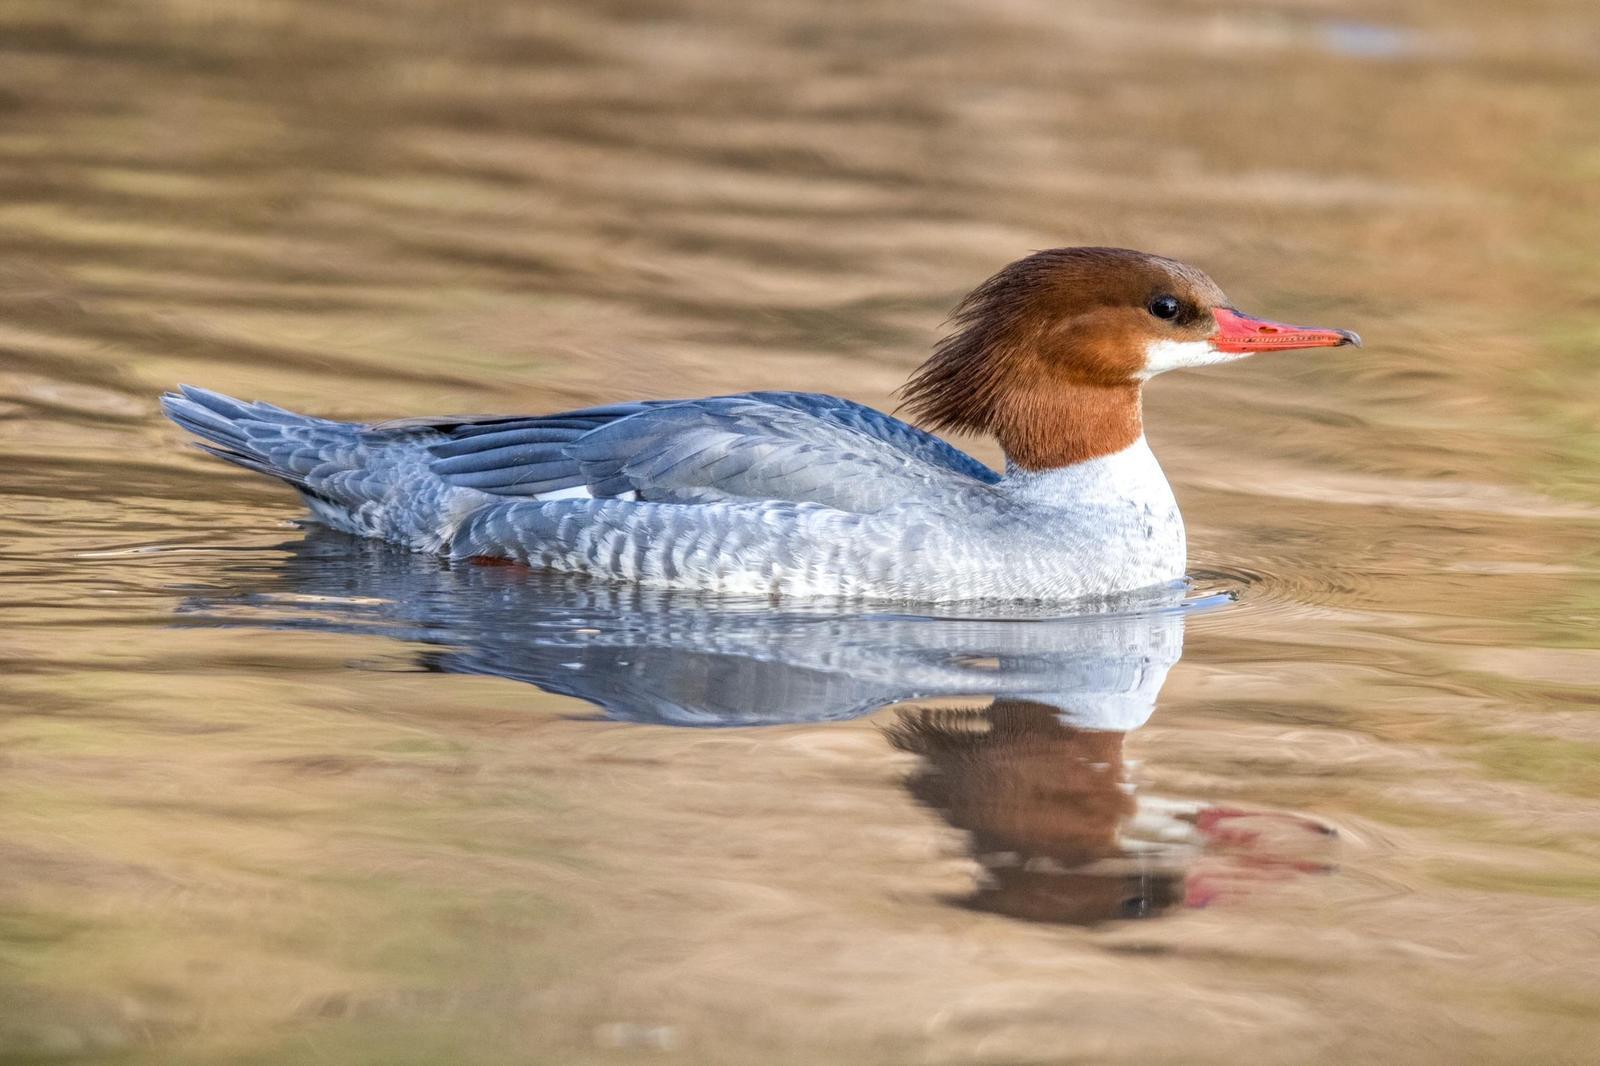 Common Merganser (North American) Photo by Tom Ford-Hutchinson